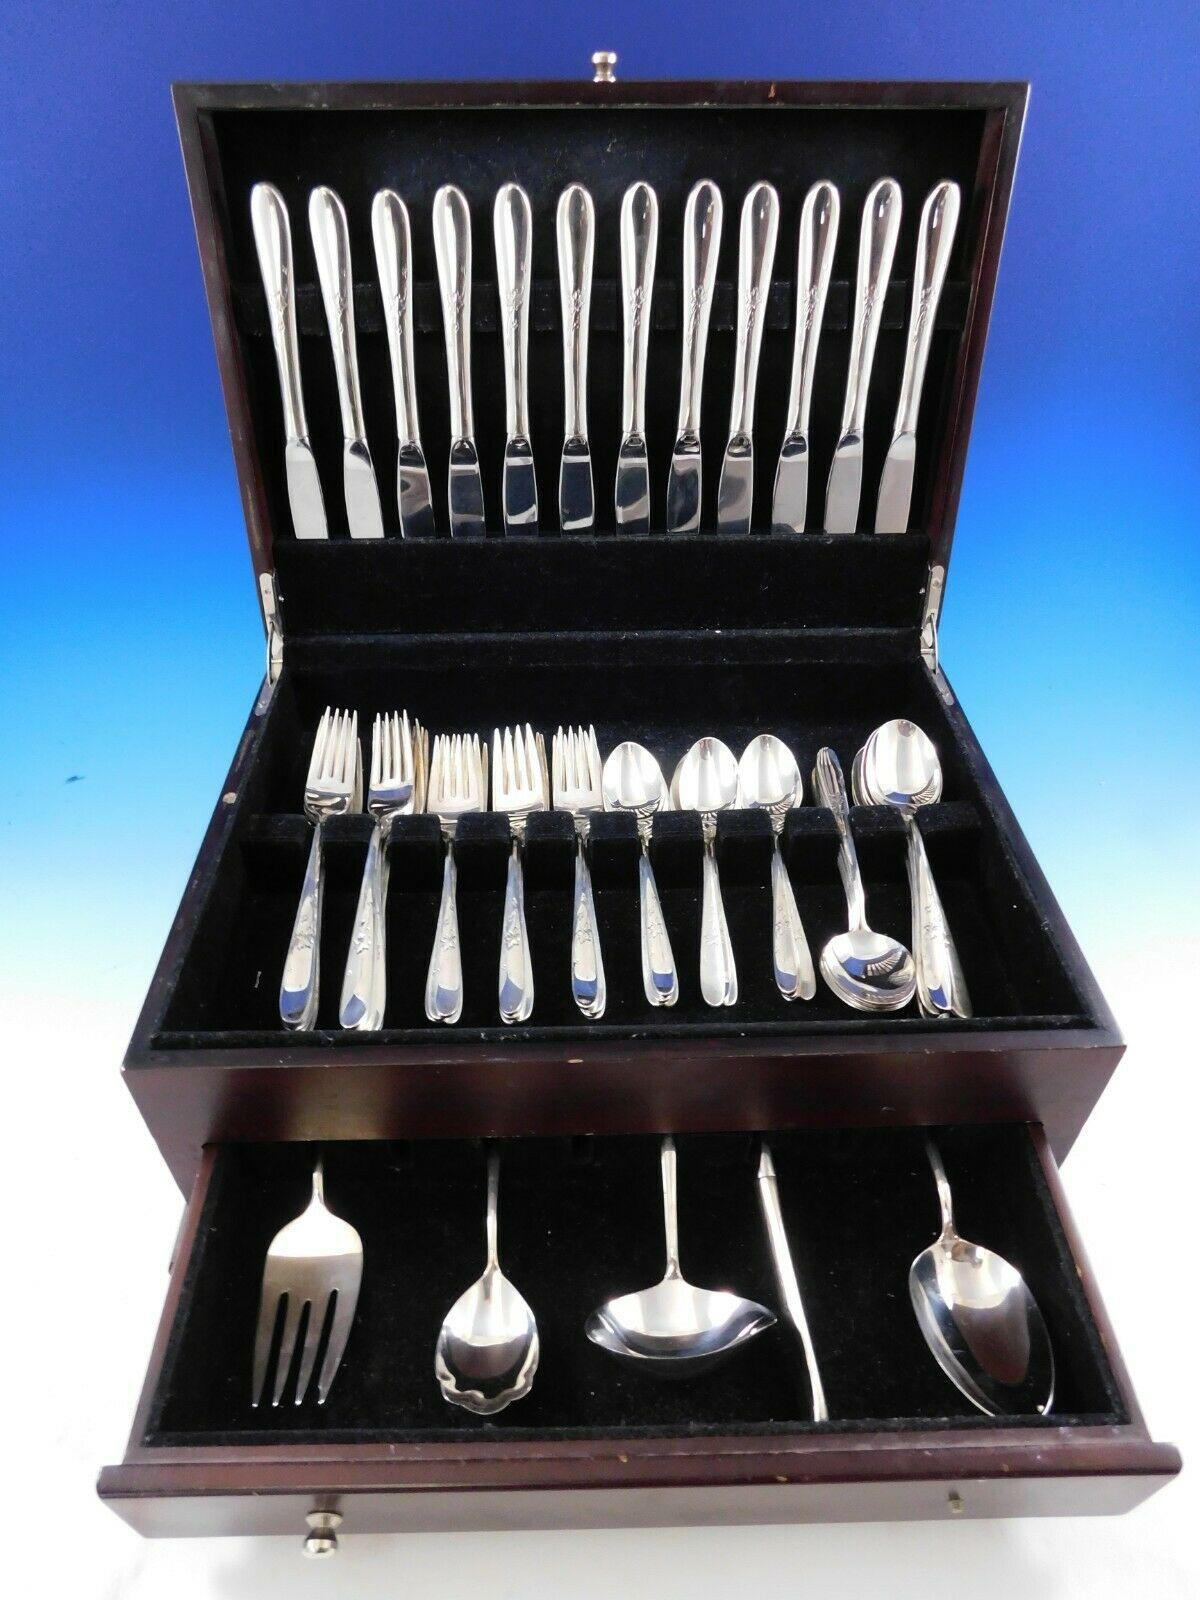 Stunning Autumn Leaves by Reed & Barton sterling silver flatware set - 65 pieces. This set includes:

12 Knives, 9